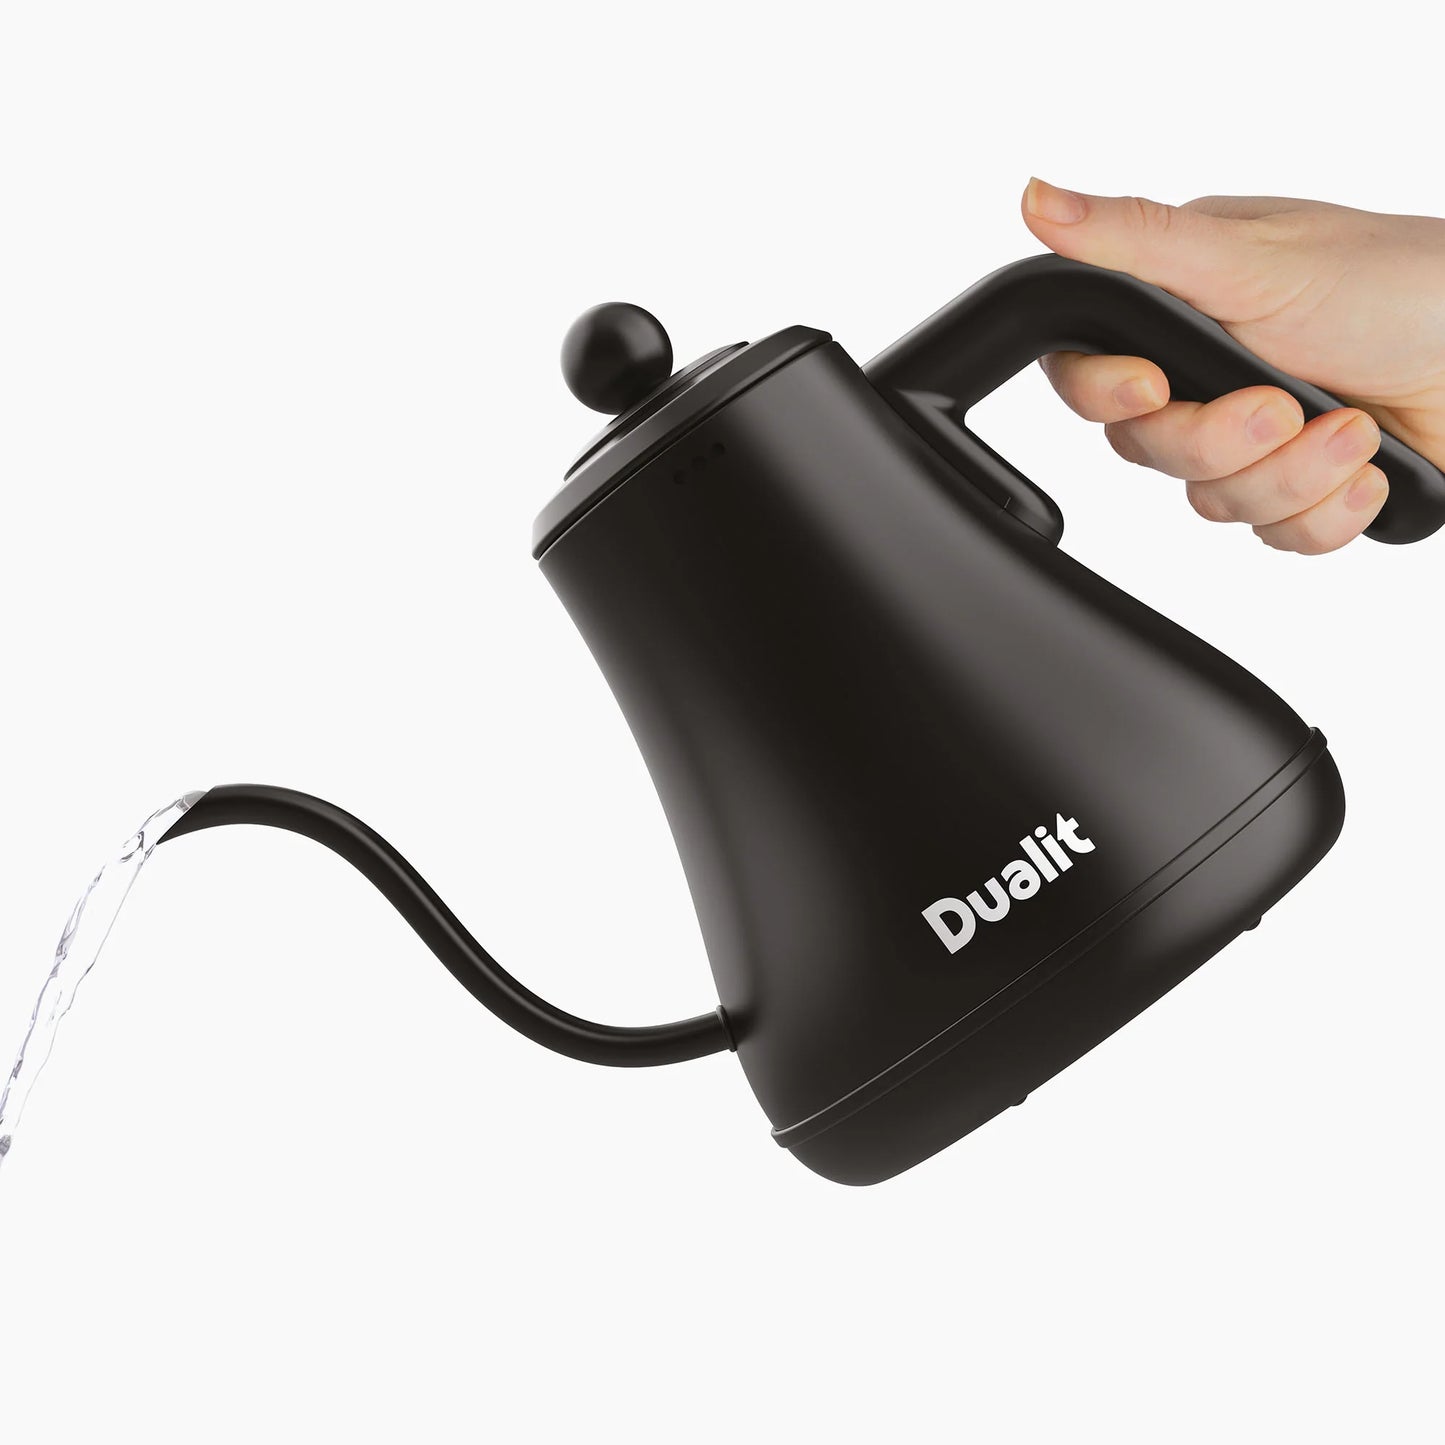 Dualit Pour over kettle